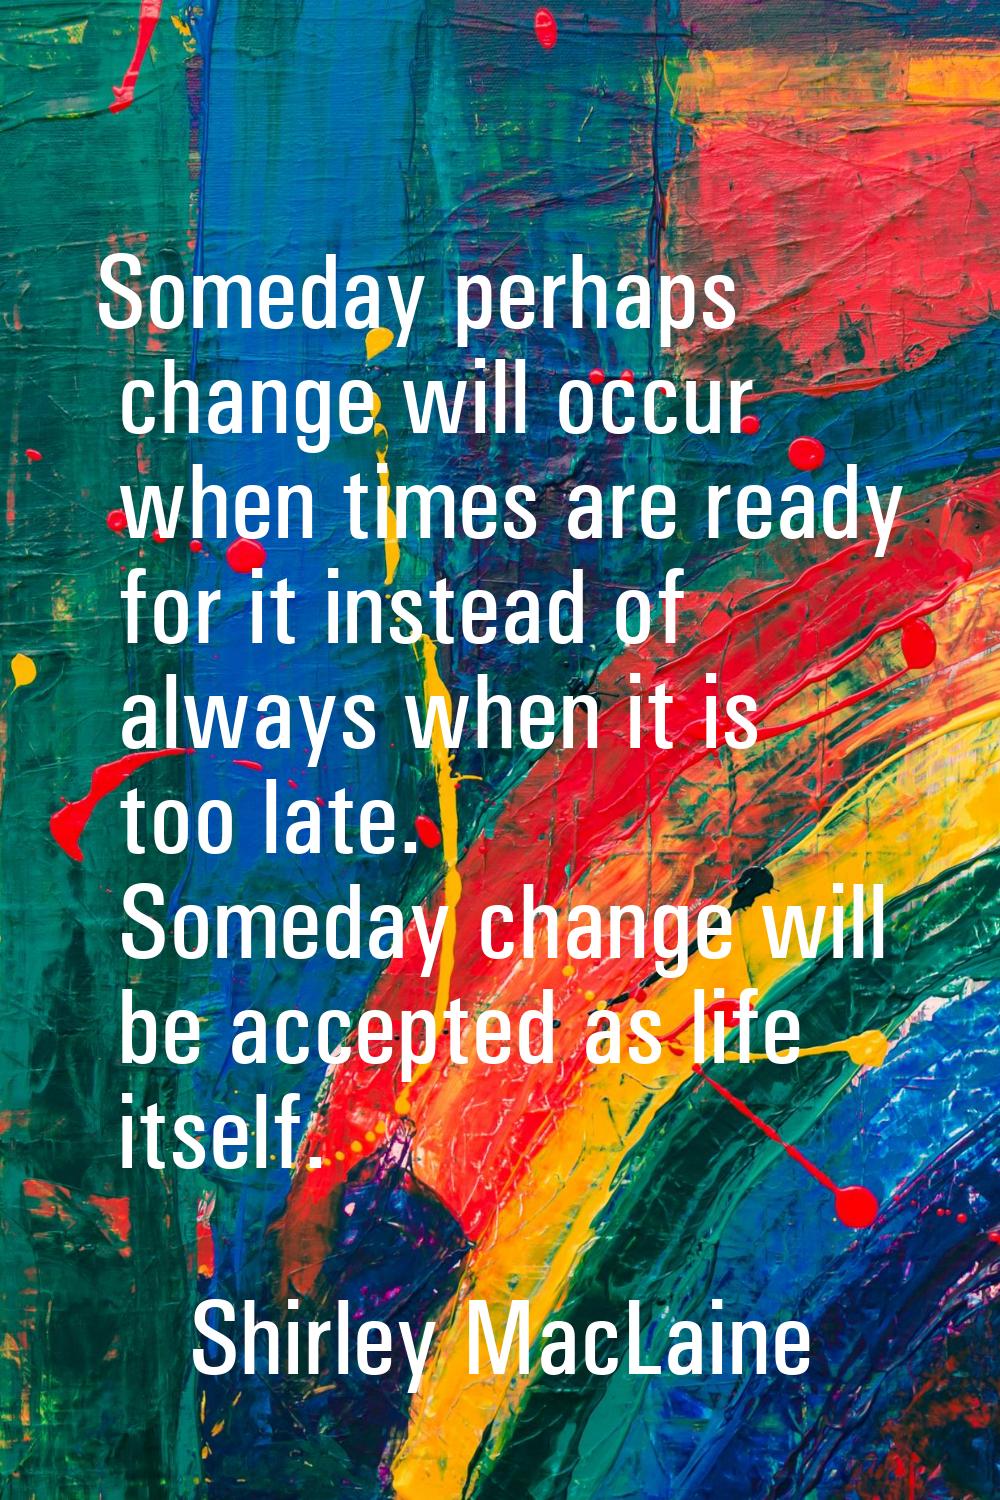 Someday perhaps change will occur when times are ready for it instead of always when it is too late